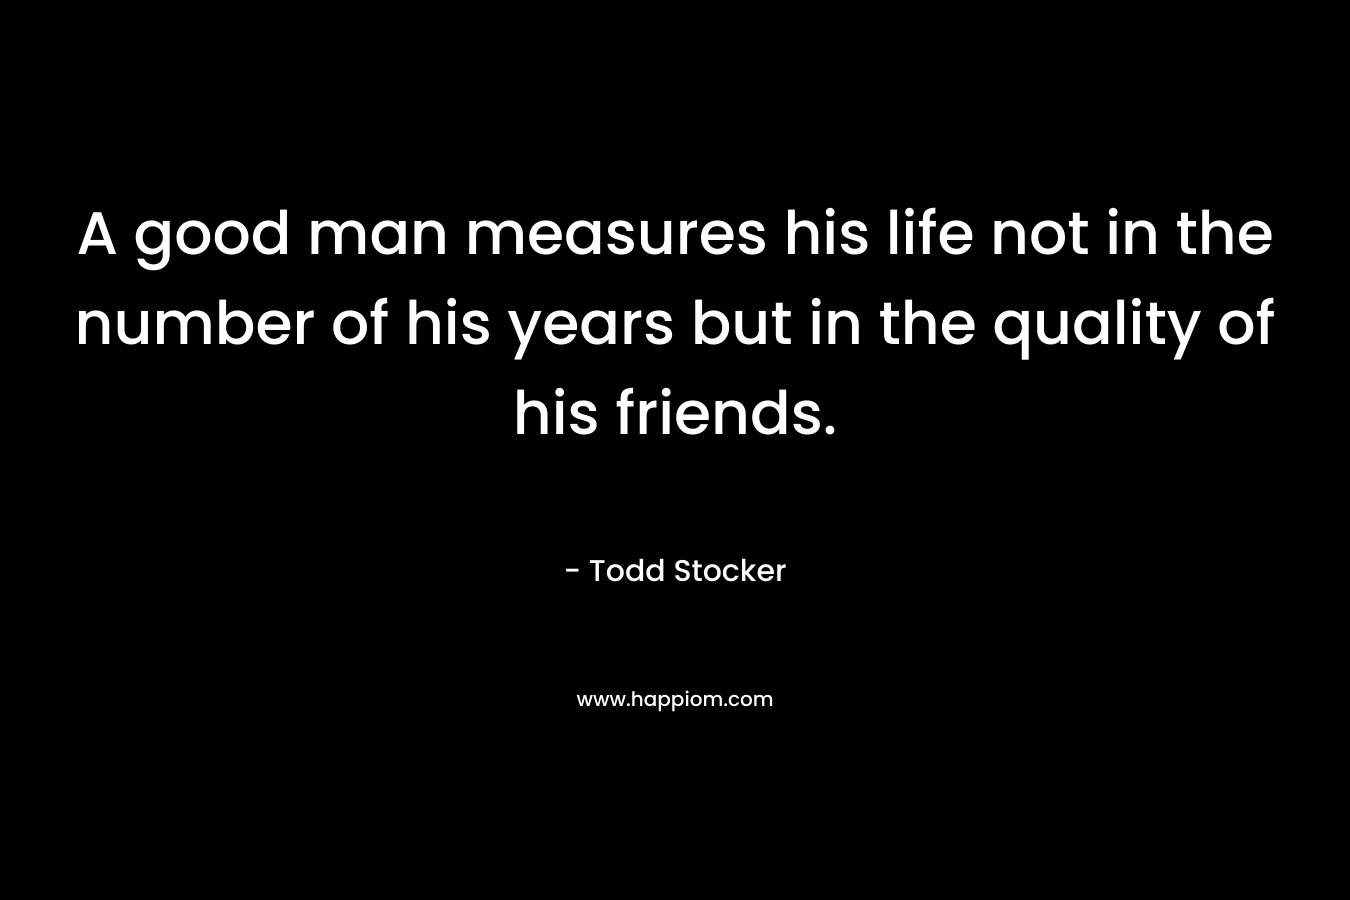 A good man measures his life not in the number of his years but in the quality of his friends. – Todd Stocker